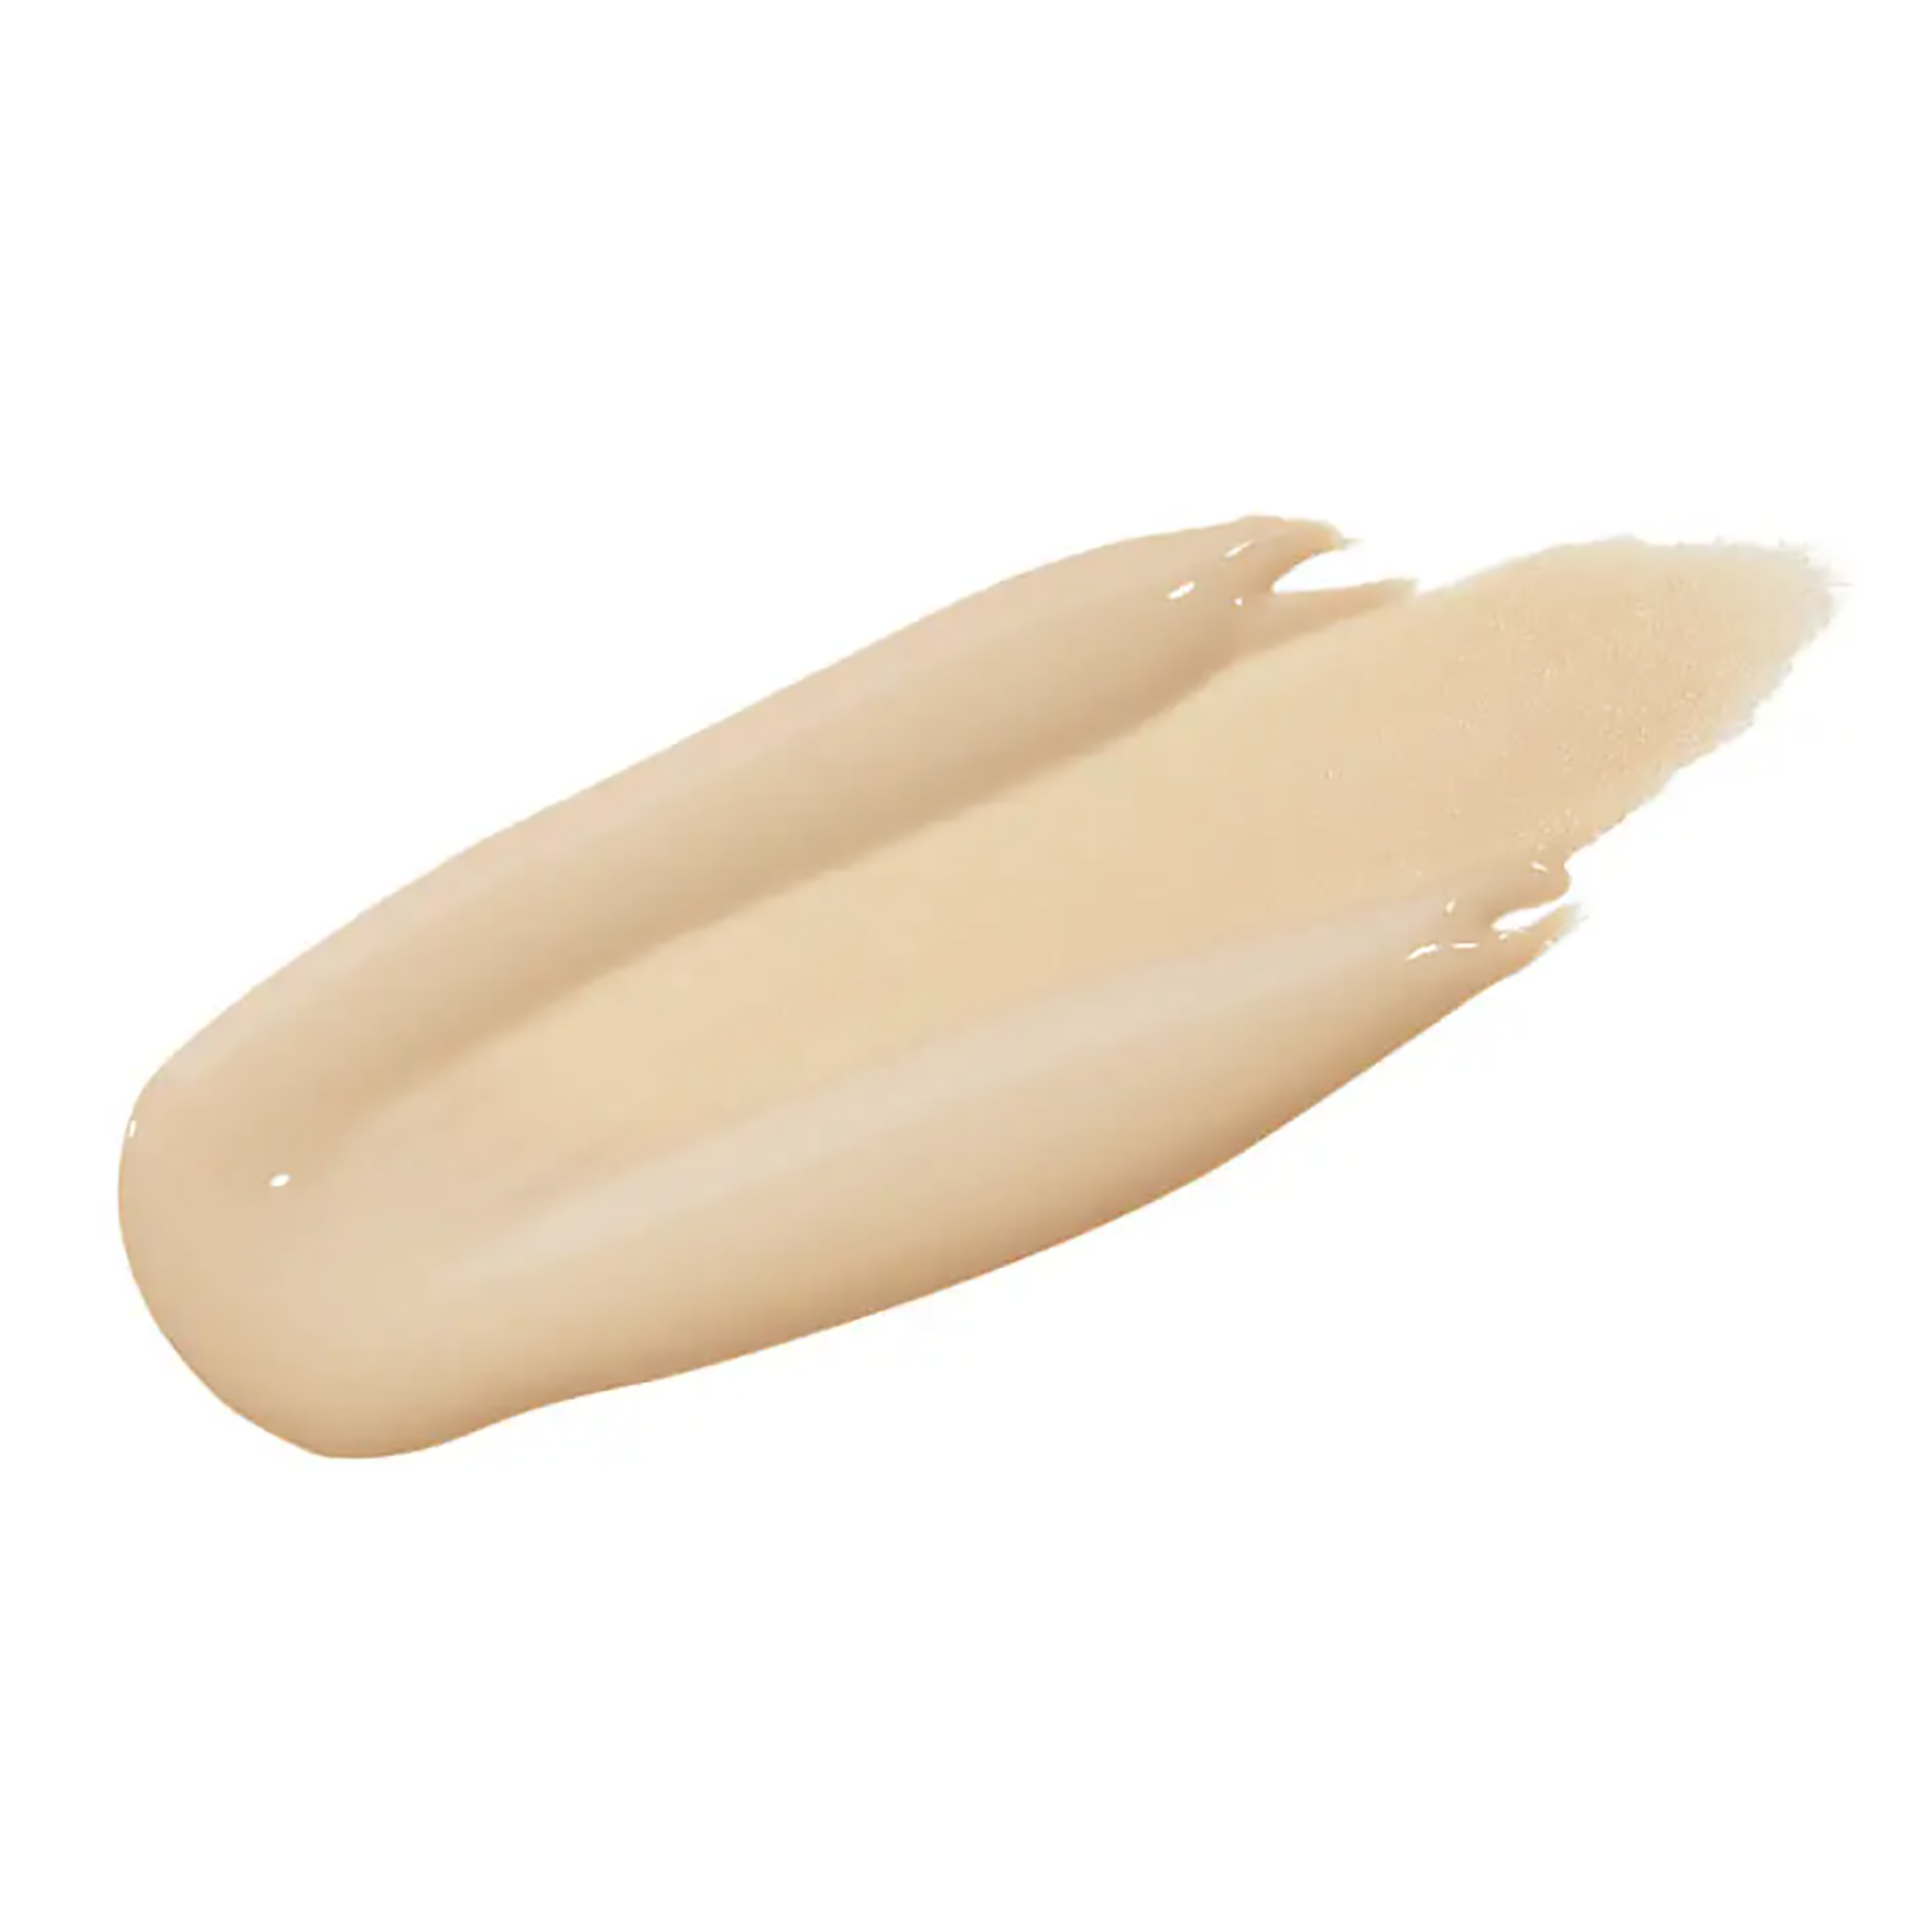 By Terry Terrybly Densiliss Anti-Wrinkle Concealer #3 Natural Beige